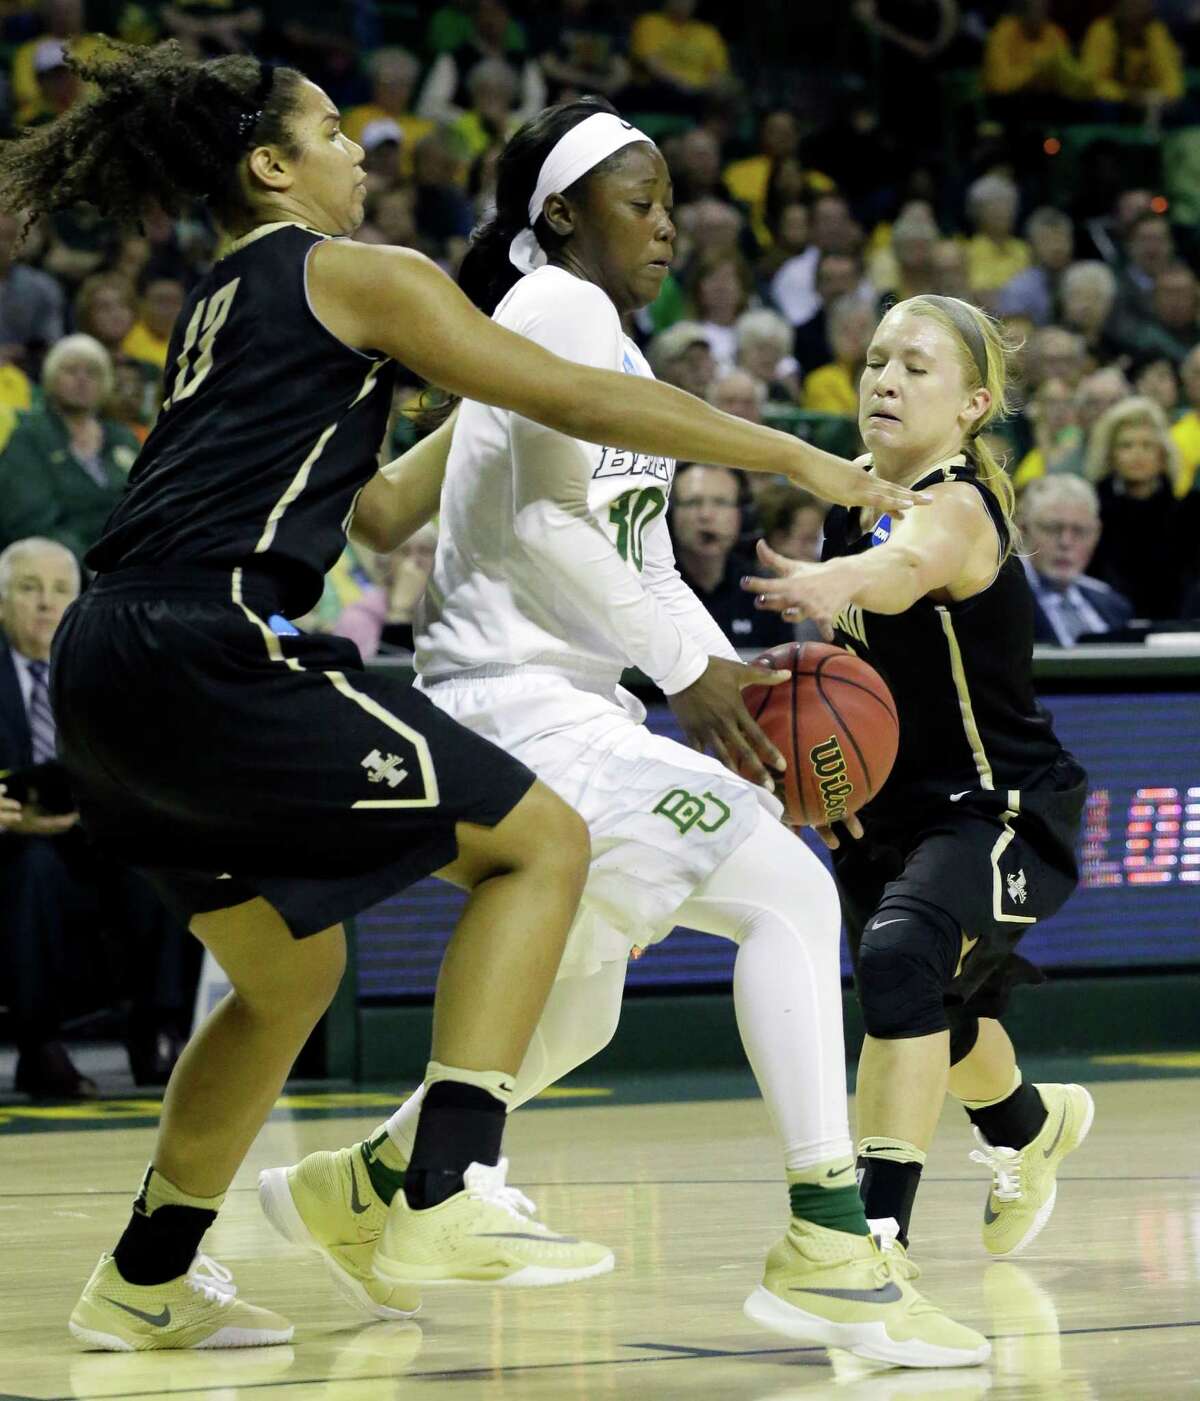 Baylor's Alexis Jones fights off being double-teamed by Idaho's Ali Forde, left, and Karlee Wilson, right, to lead the top-seeded Lady Bears with 23 points.